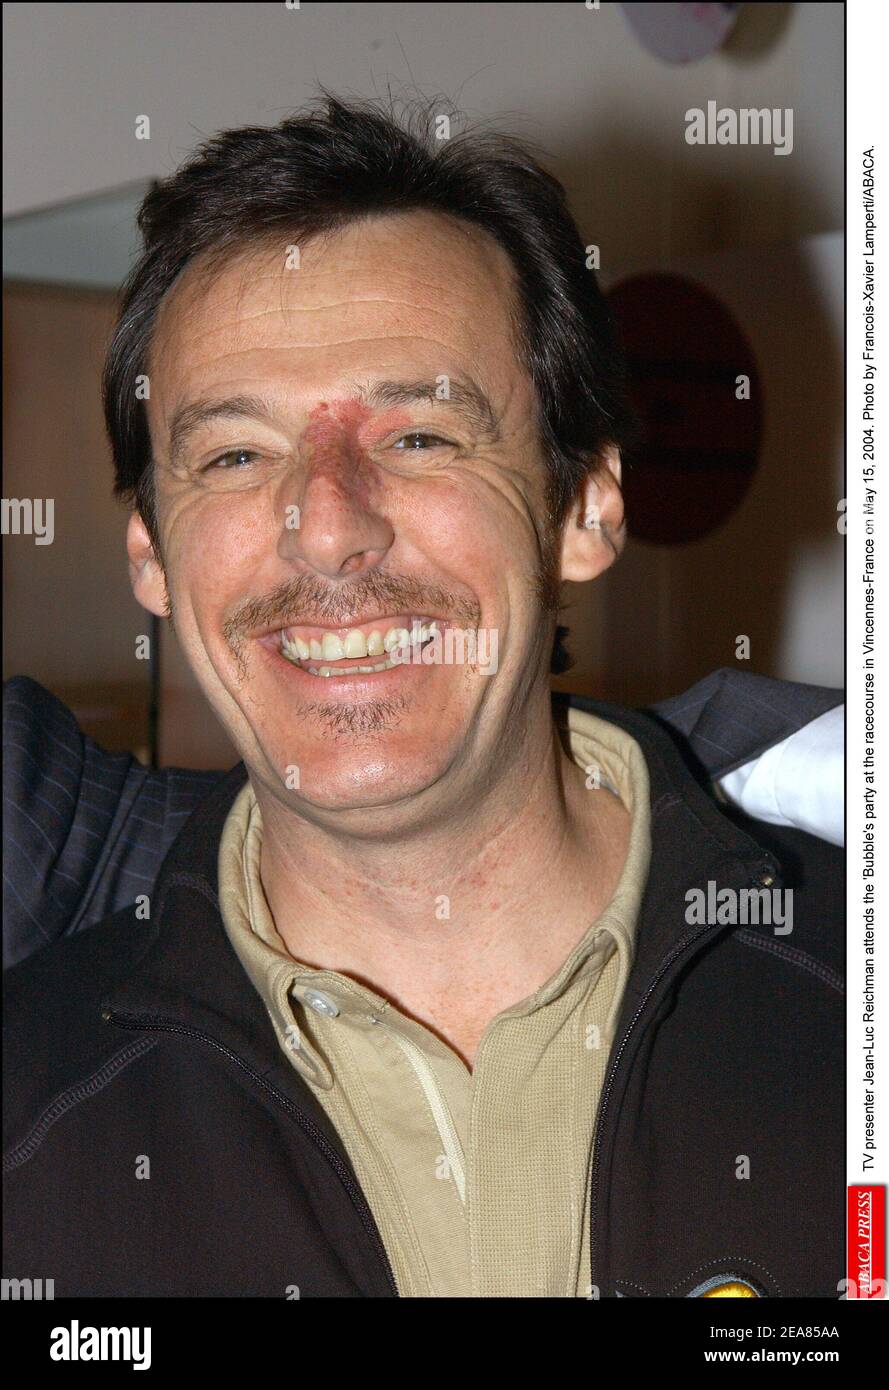 TV presenter Jean-Luc Reichmann attends the 'Bubble's party at the  racecourse in Vincennes-France on May 15, 2004. Photo by Francois-Xavier  Lamperti/ABACA Stock Photo - Alamy